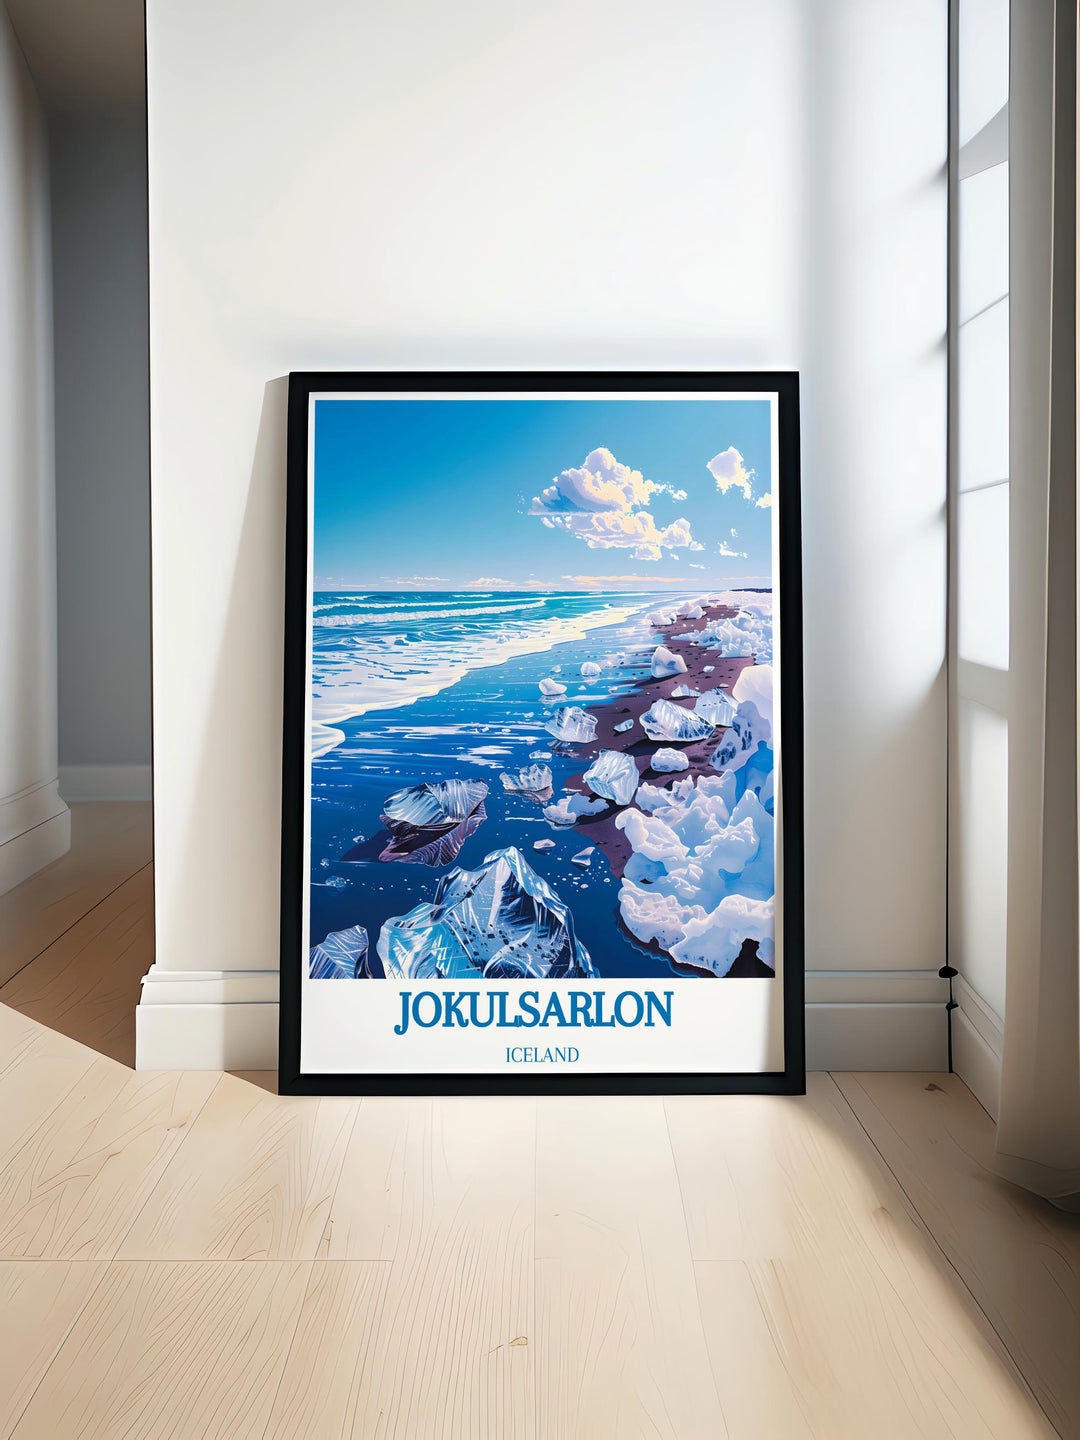 Fine art print showcasing the vivid blue icebergs of Jokulsarlon glacier lagoon in Iceland perfect for adding a touch of serene nature to any room